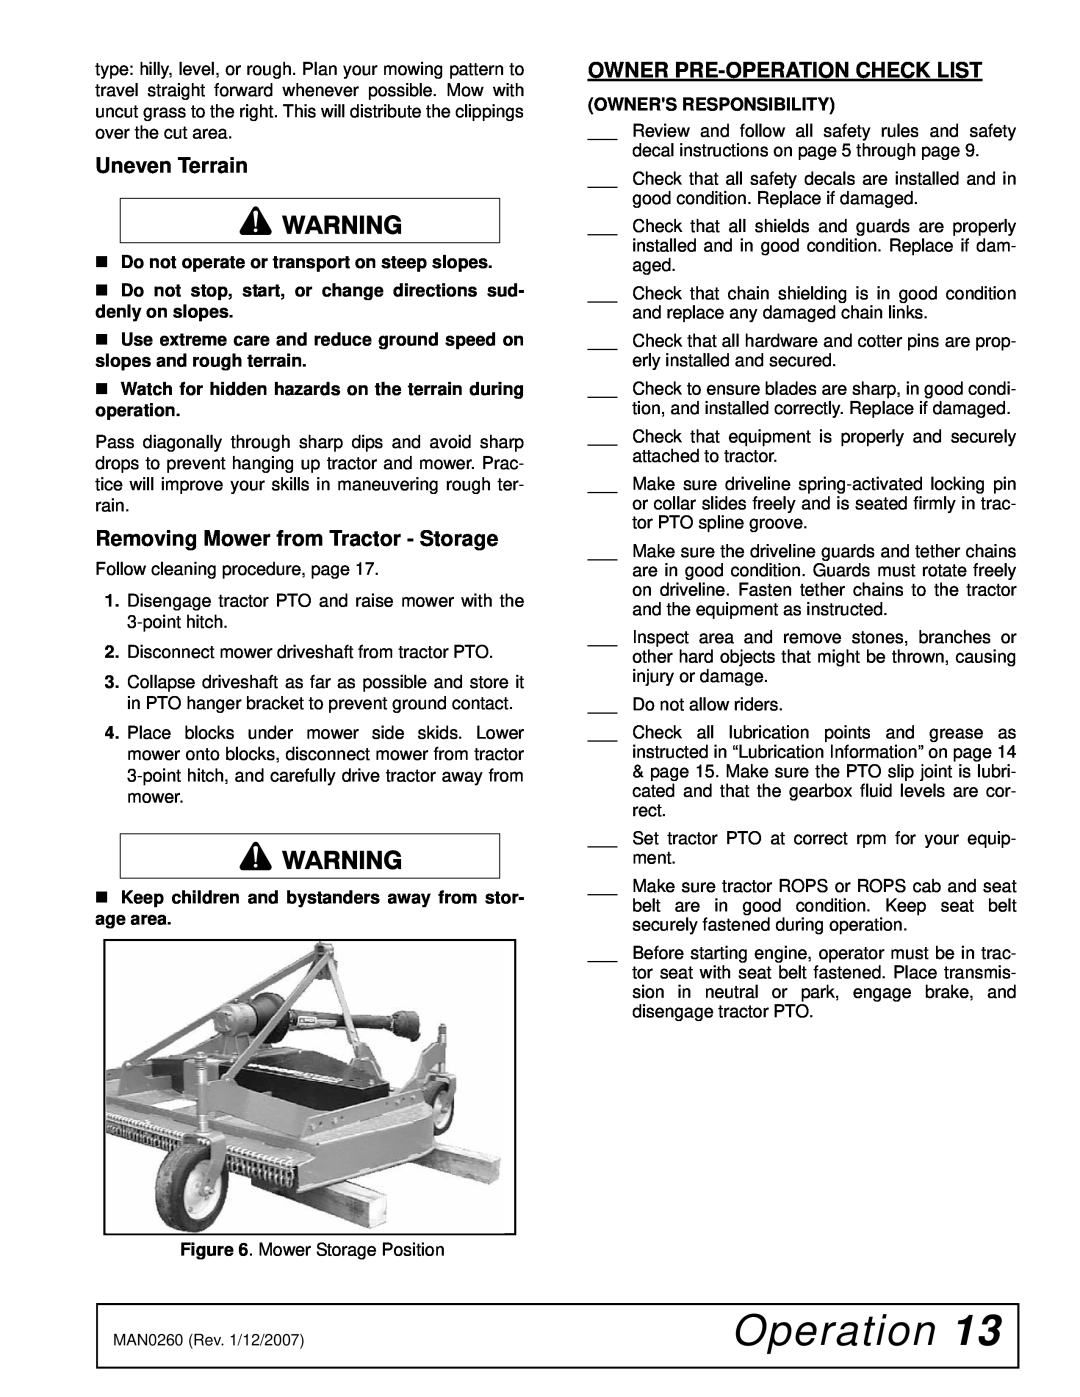 Woods Equipment RD72, RDC54, RD60 manual Removing Mower from Tractor - Storage, Owner Pre-Operationcheck List 